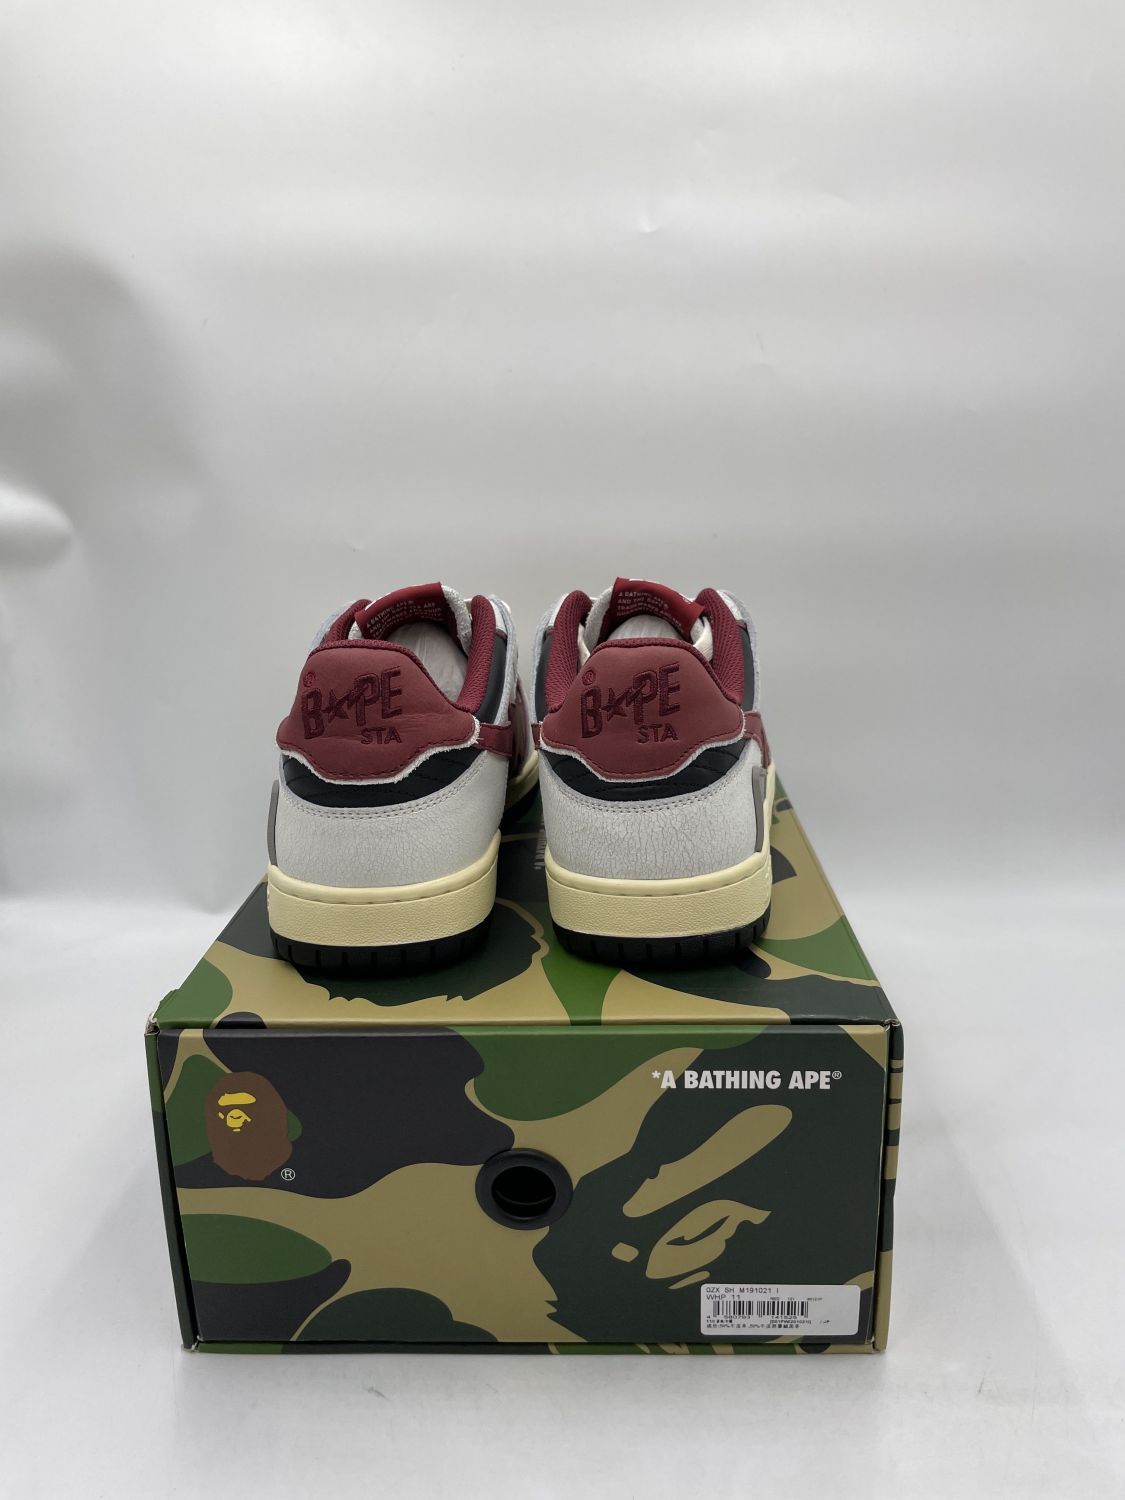 18981 - A Bathing Ape Bape Sta Low M2 Red White | Item Details - AfterMarket